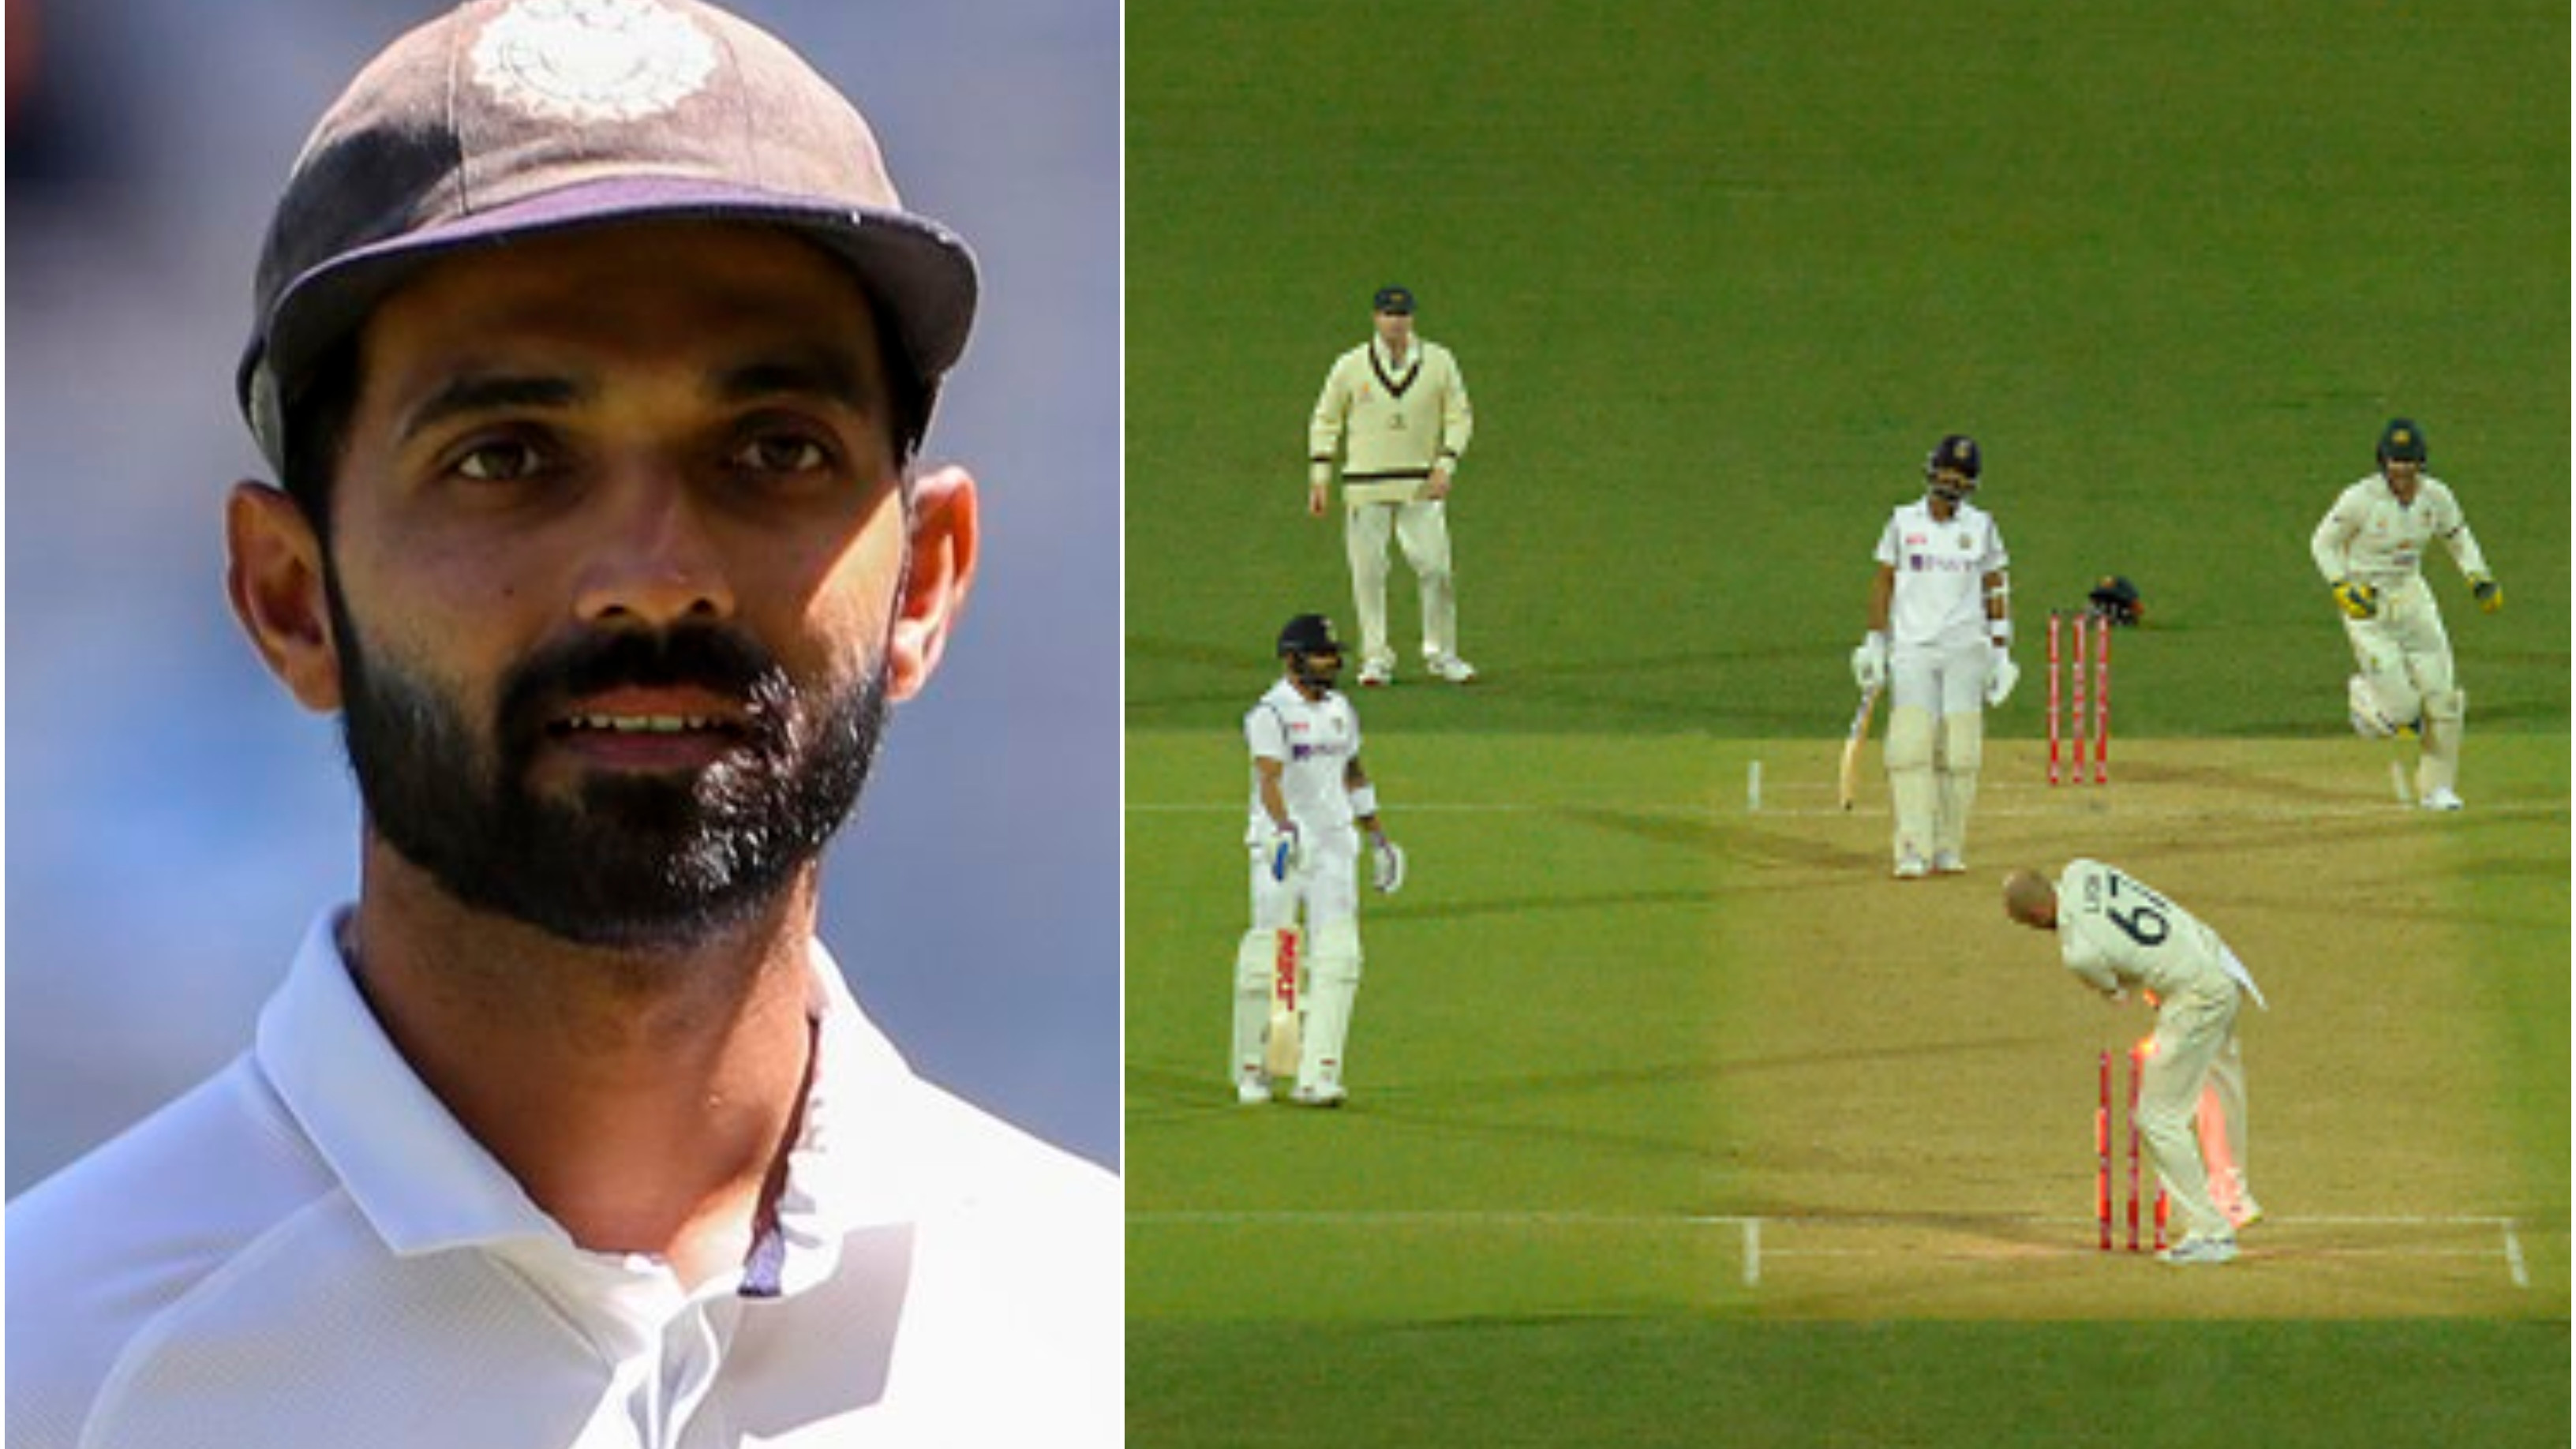 “Can never forget that moment”: Rahane recalls Kohli's run-out incident in Adelaide Test